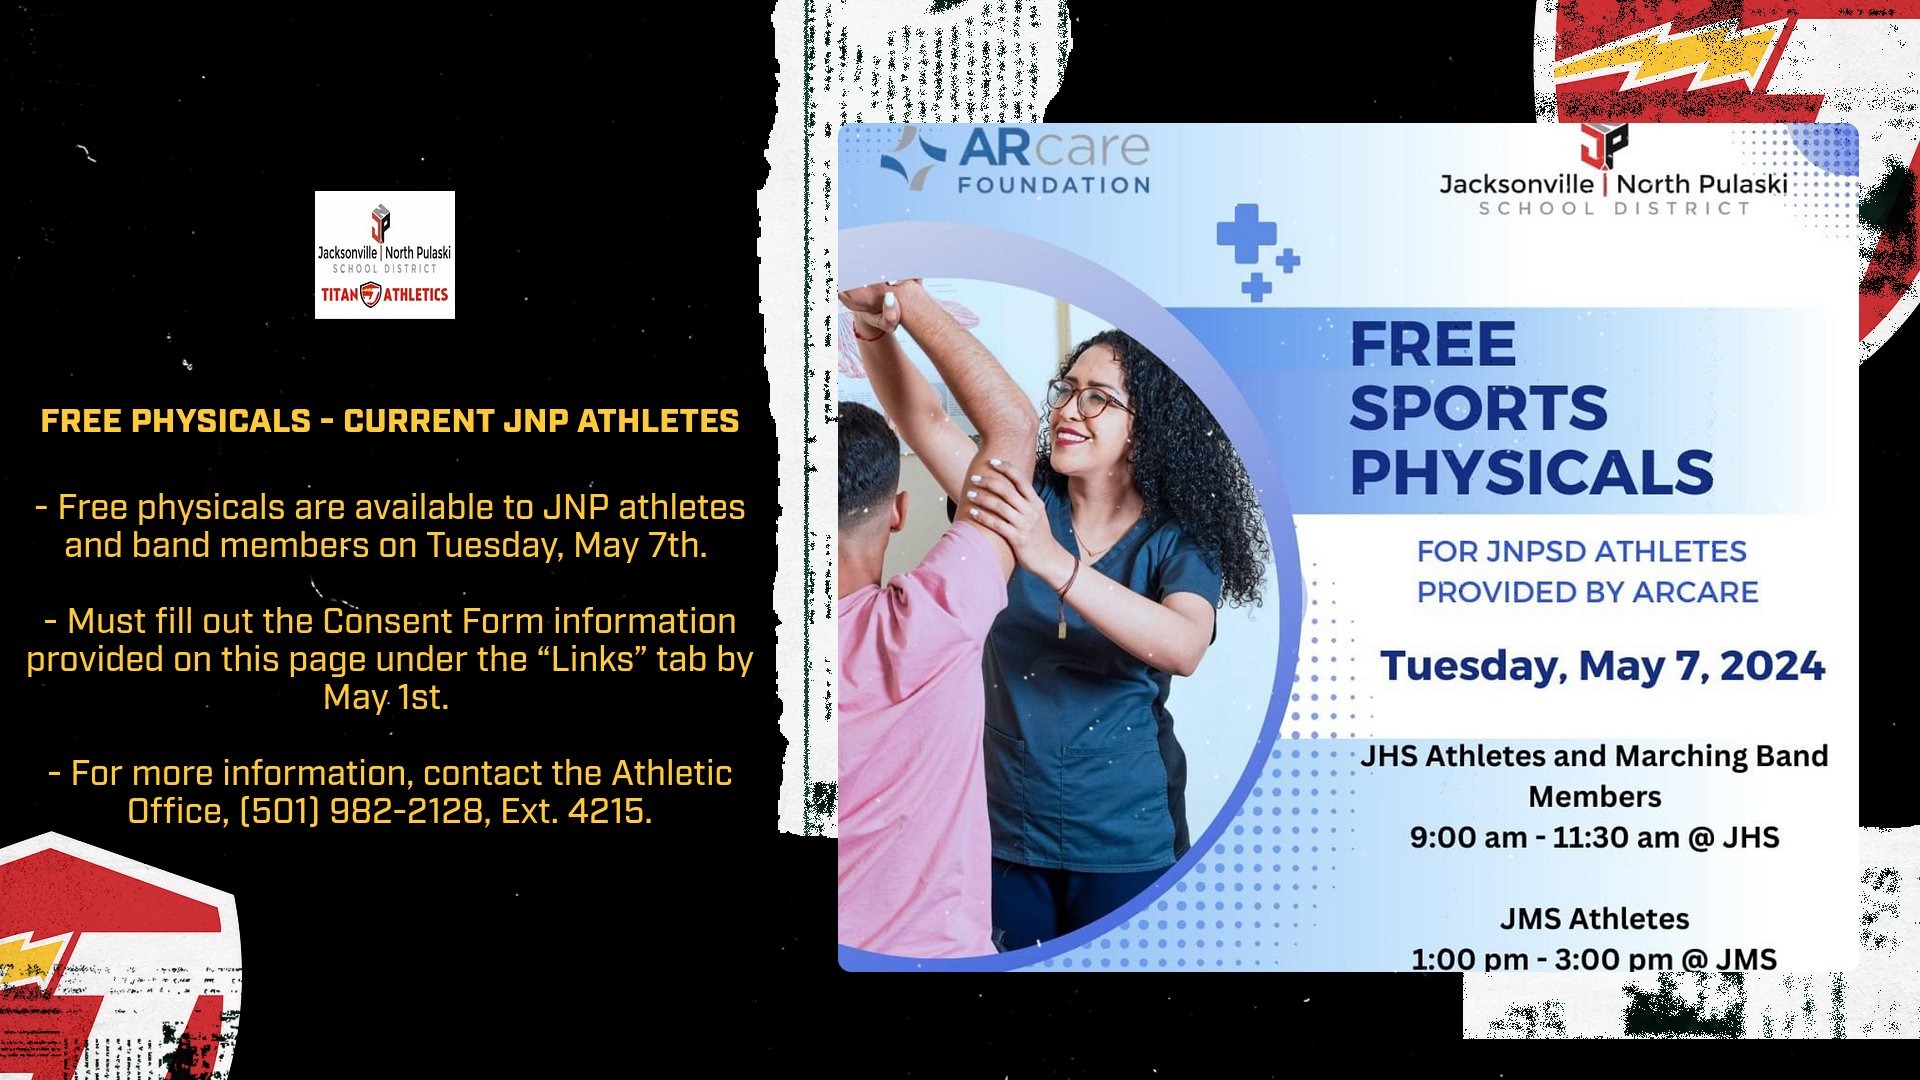 Slide 1 - Free Physicals for Current JNPSD Athletes/Band Members